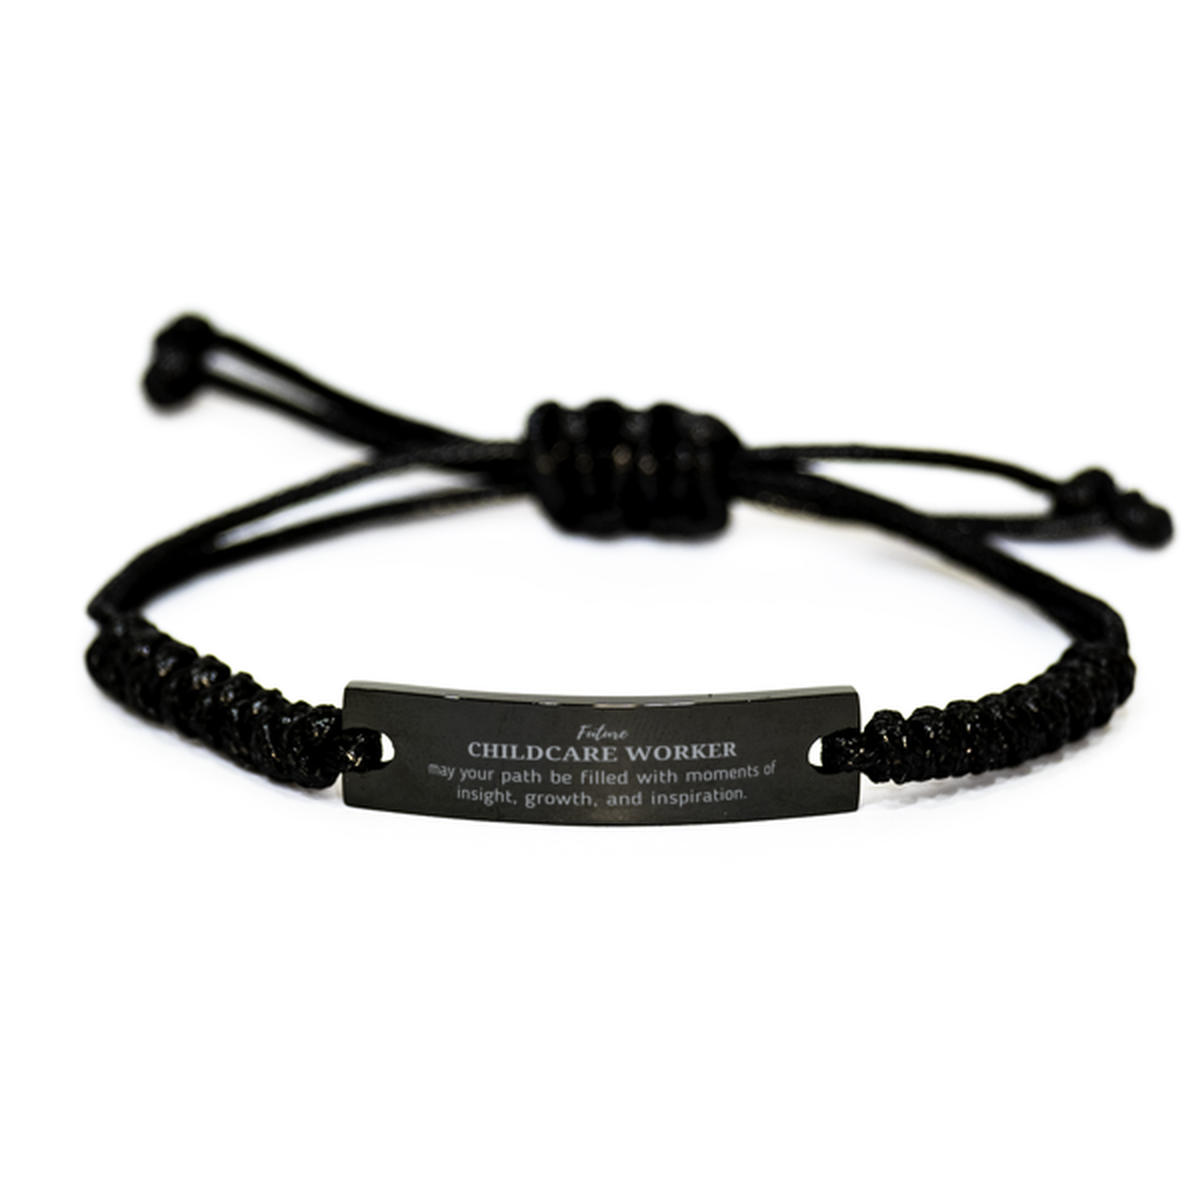 Future Childcare Worker Gifts, May your path be filled with moments of insight, Graduation Gifts for New Childcare Worker, Christmas Unique Black Rope Bracelet For Men, Women, Friends